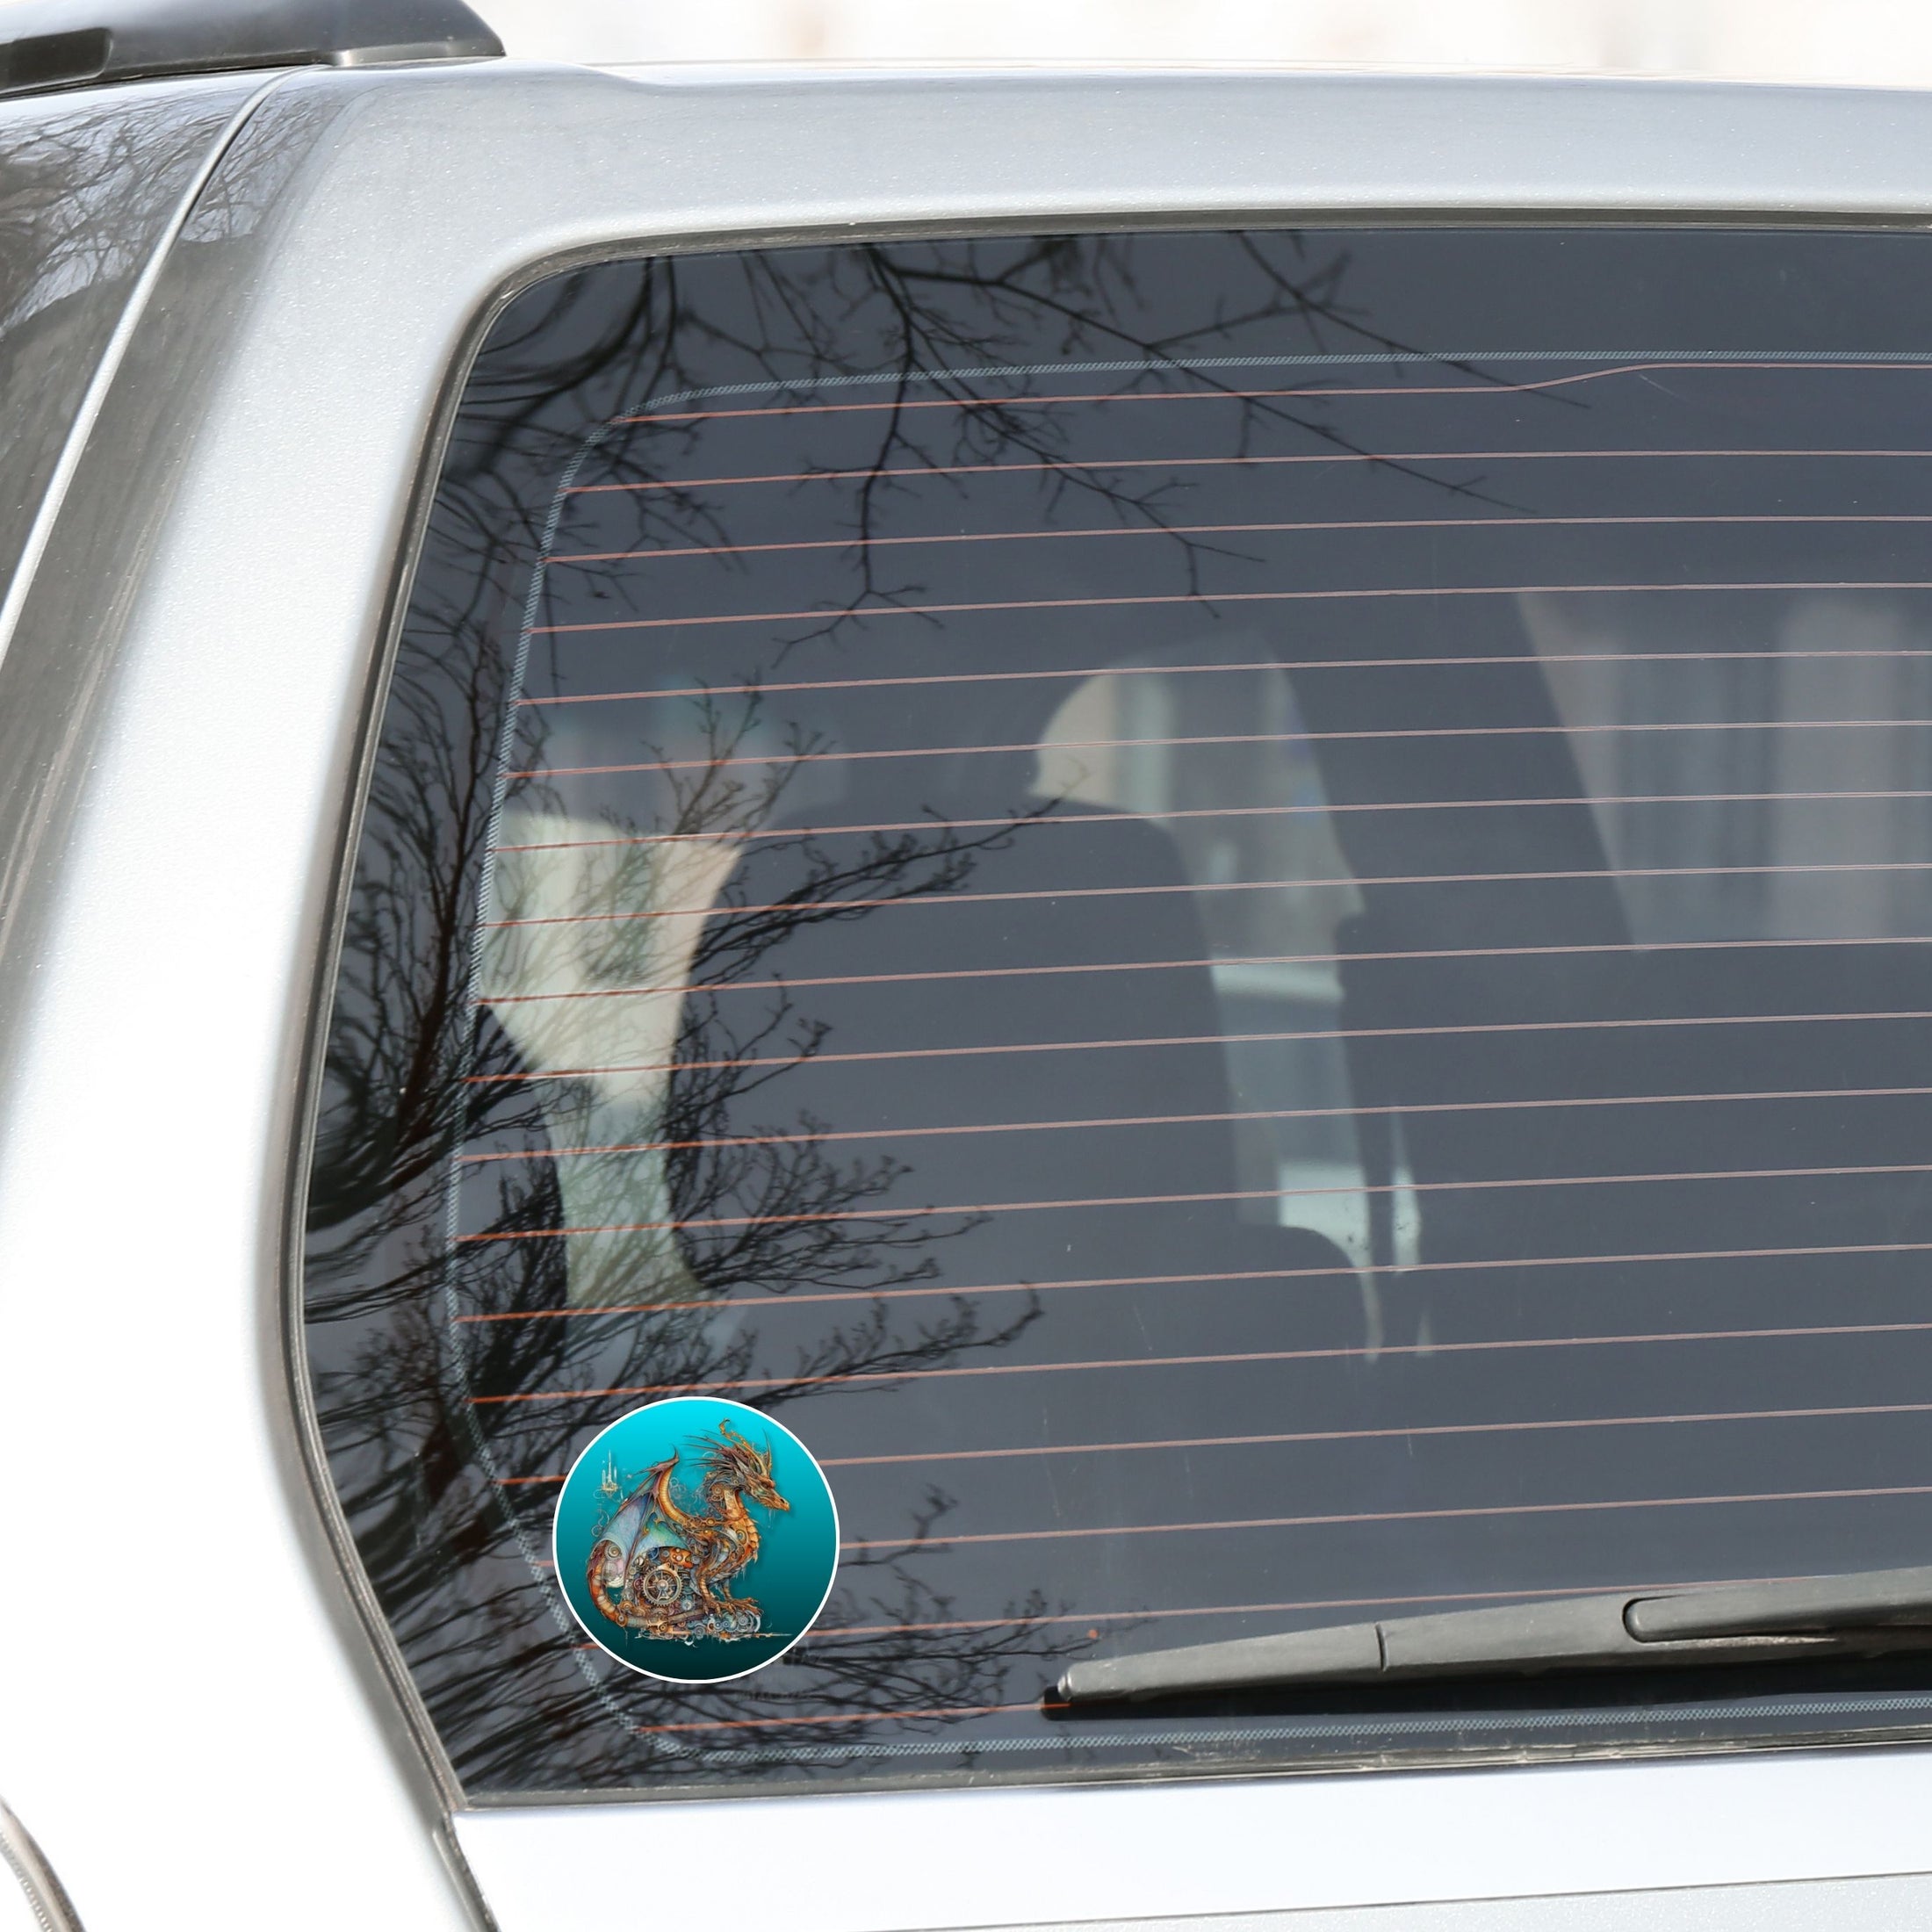 This image shows the steampunk dragon on a blue background sticker on the back window of a car.